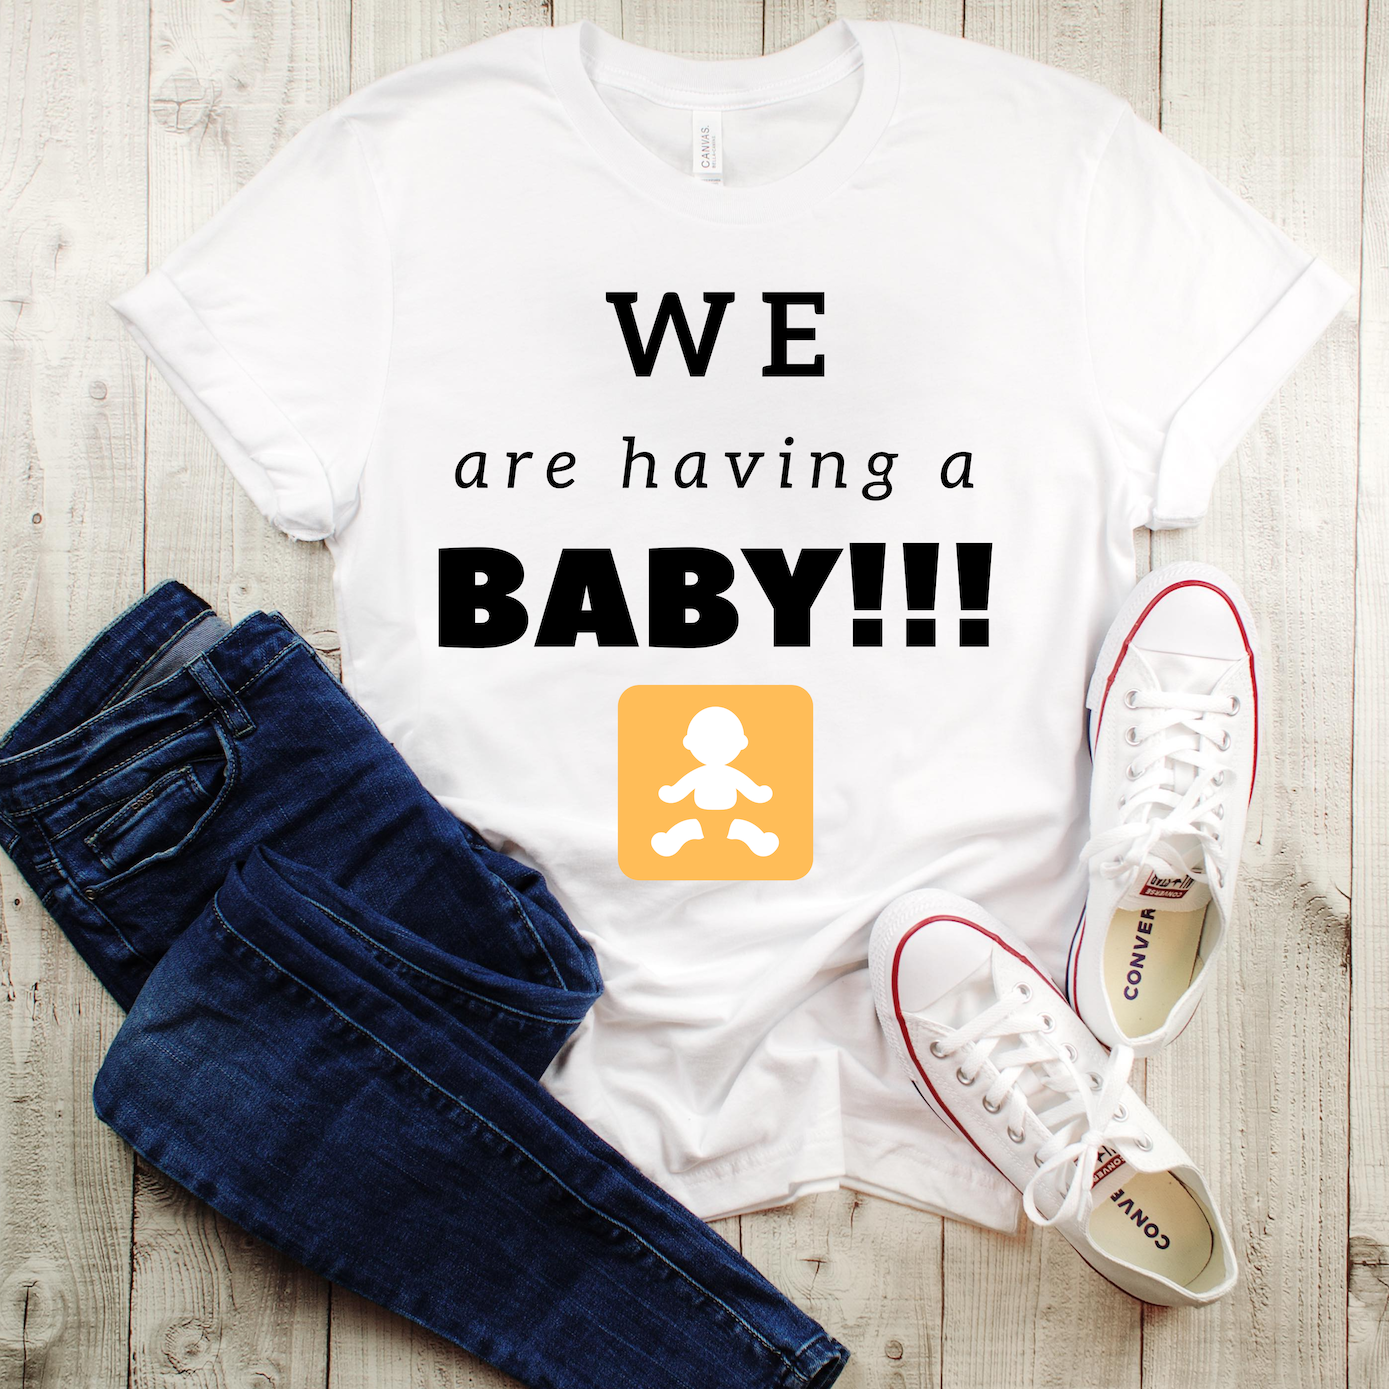 "We Are Having A Baby" Men's Tee - MamaBuzz Creations